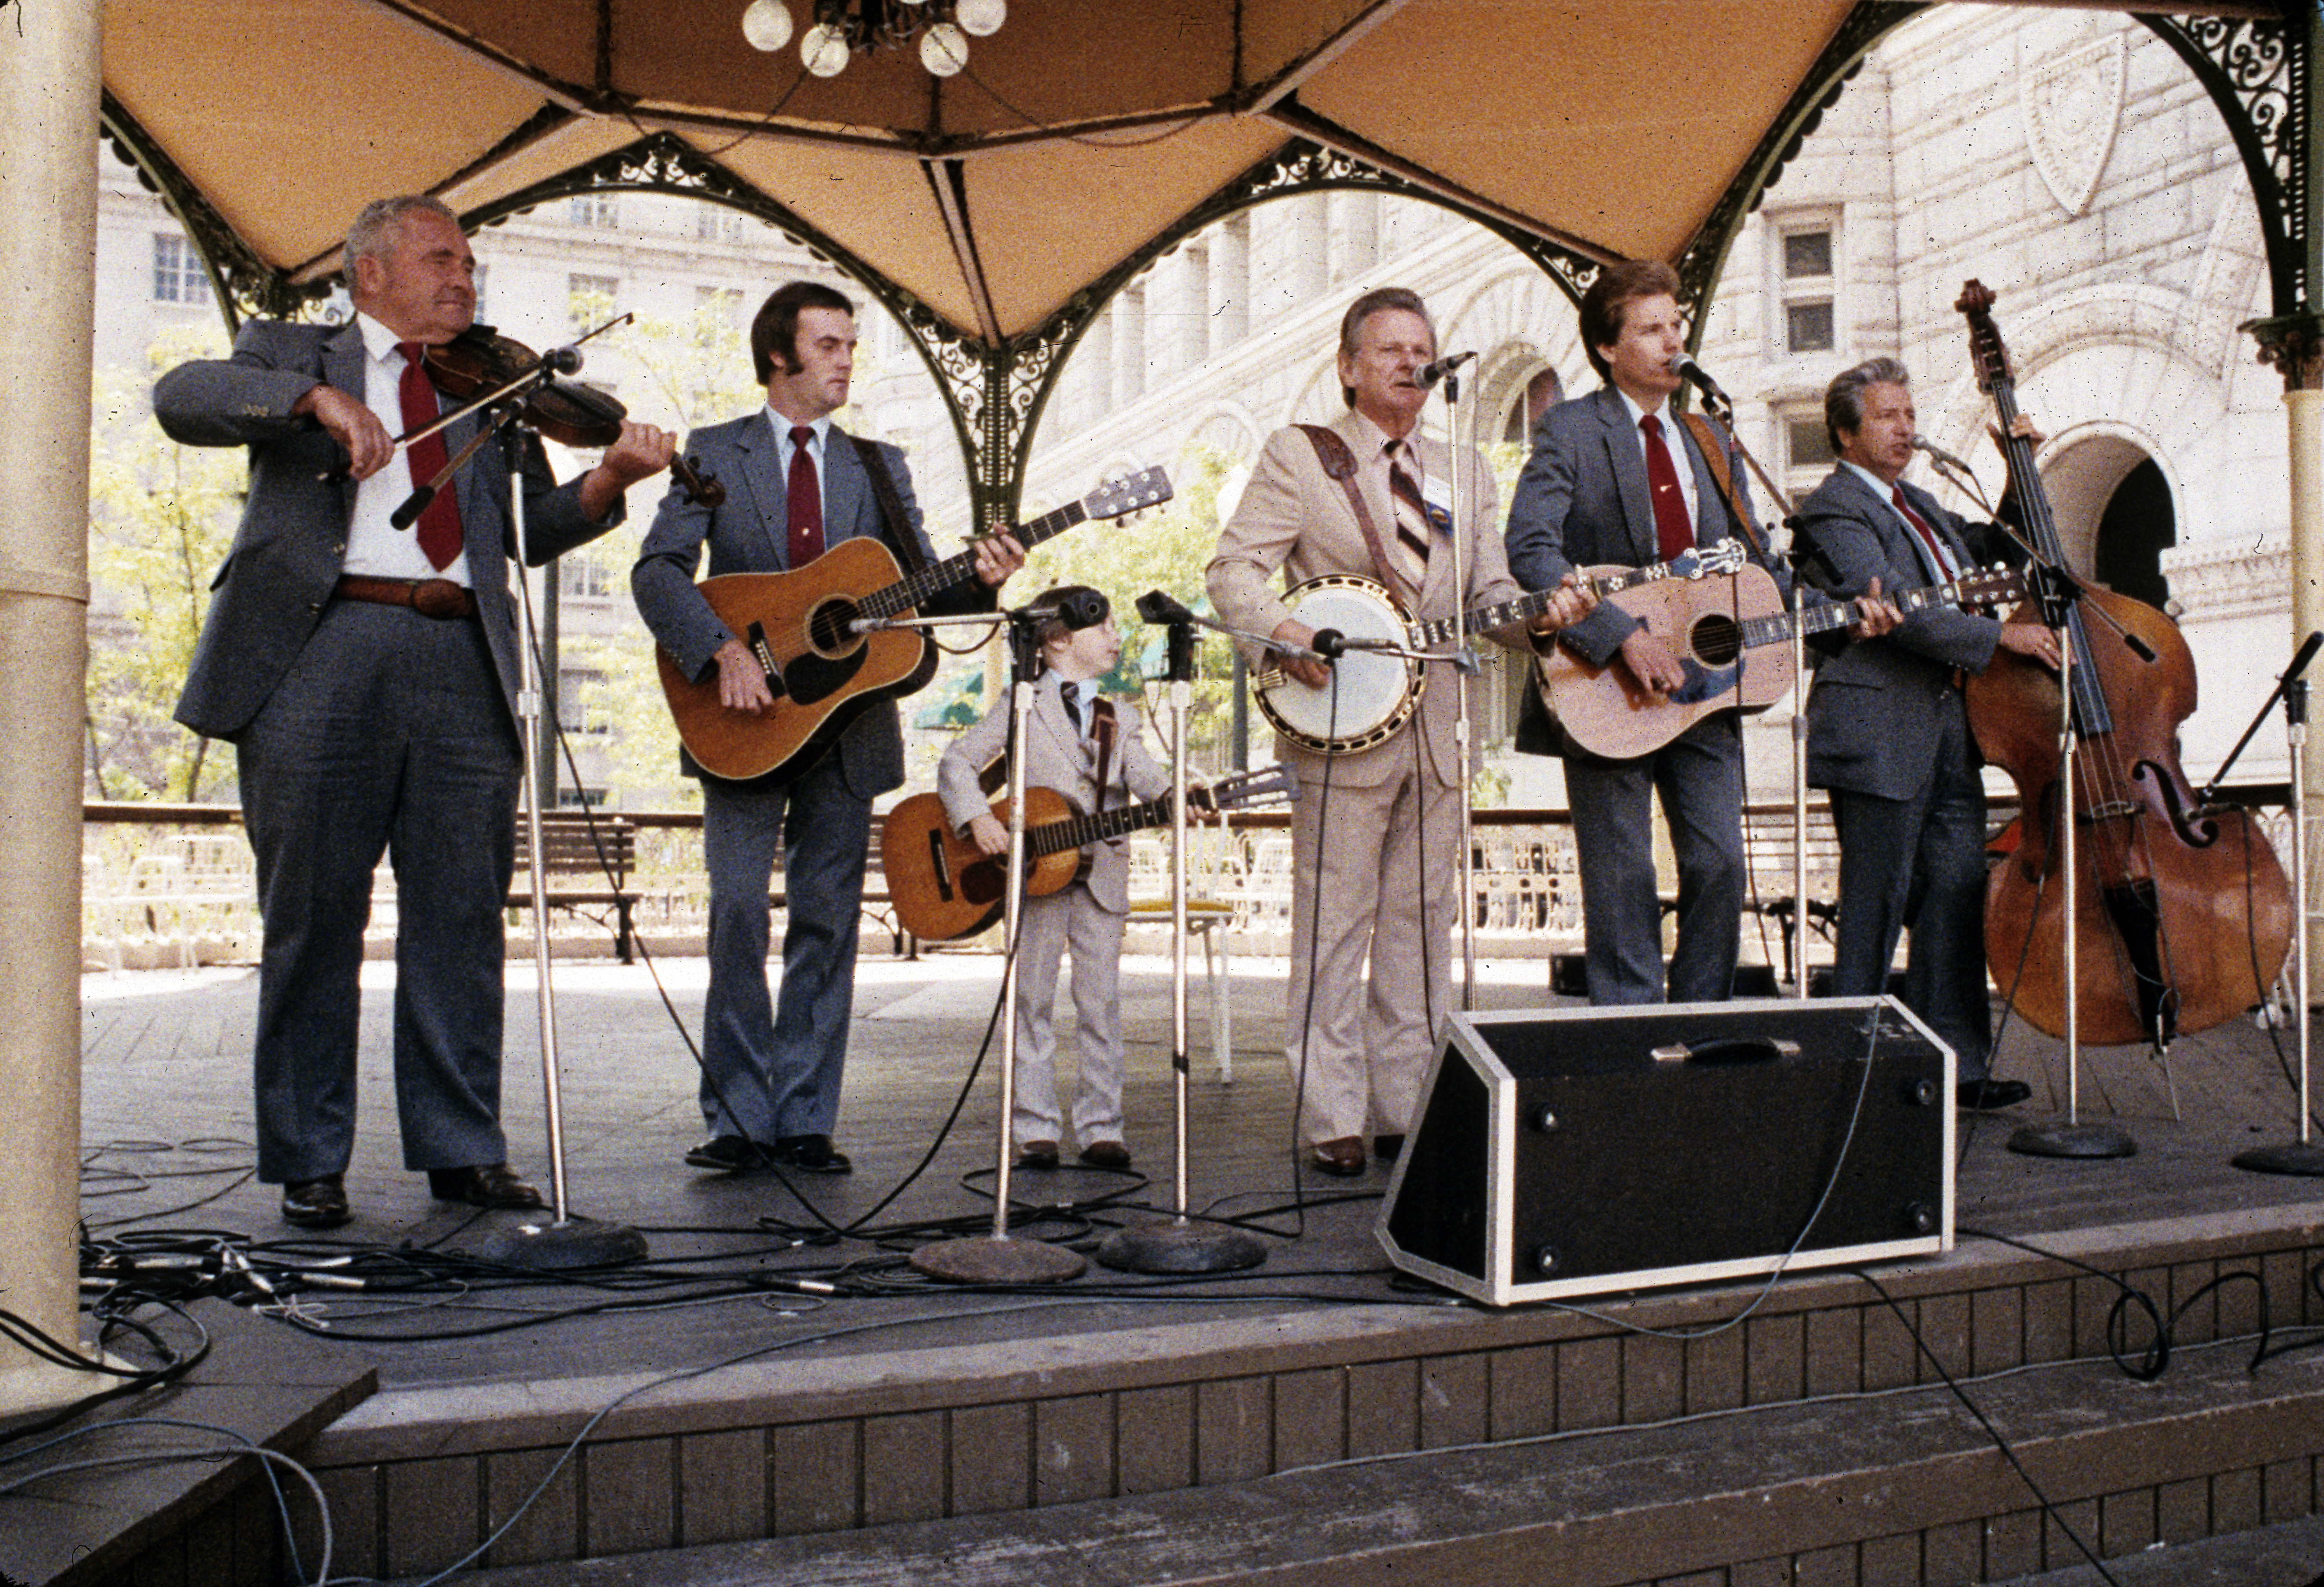 bluegrass band under tent performing in front of the Old Post Office building